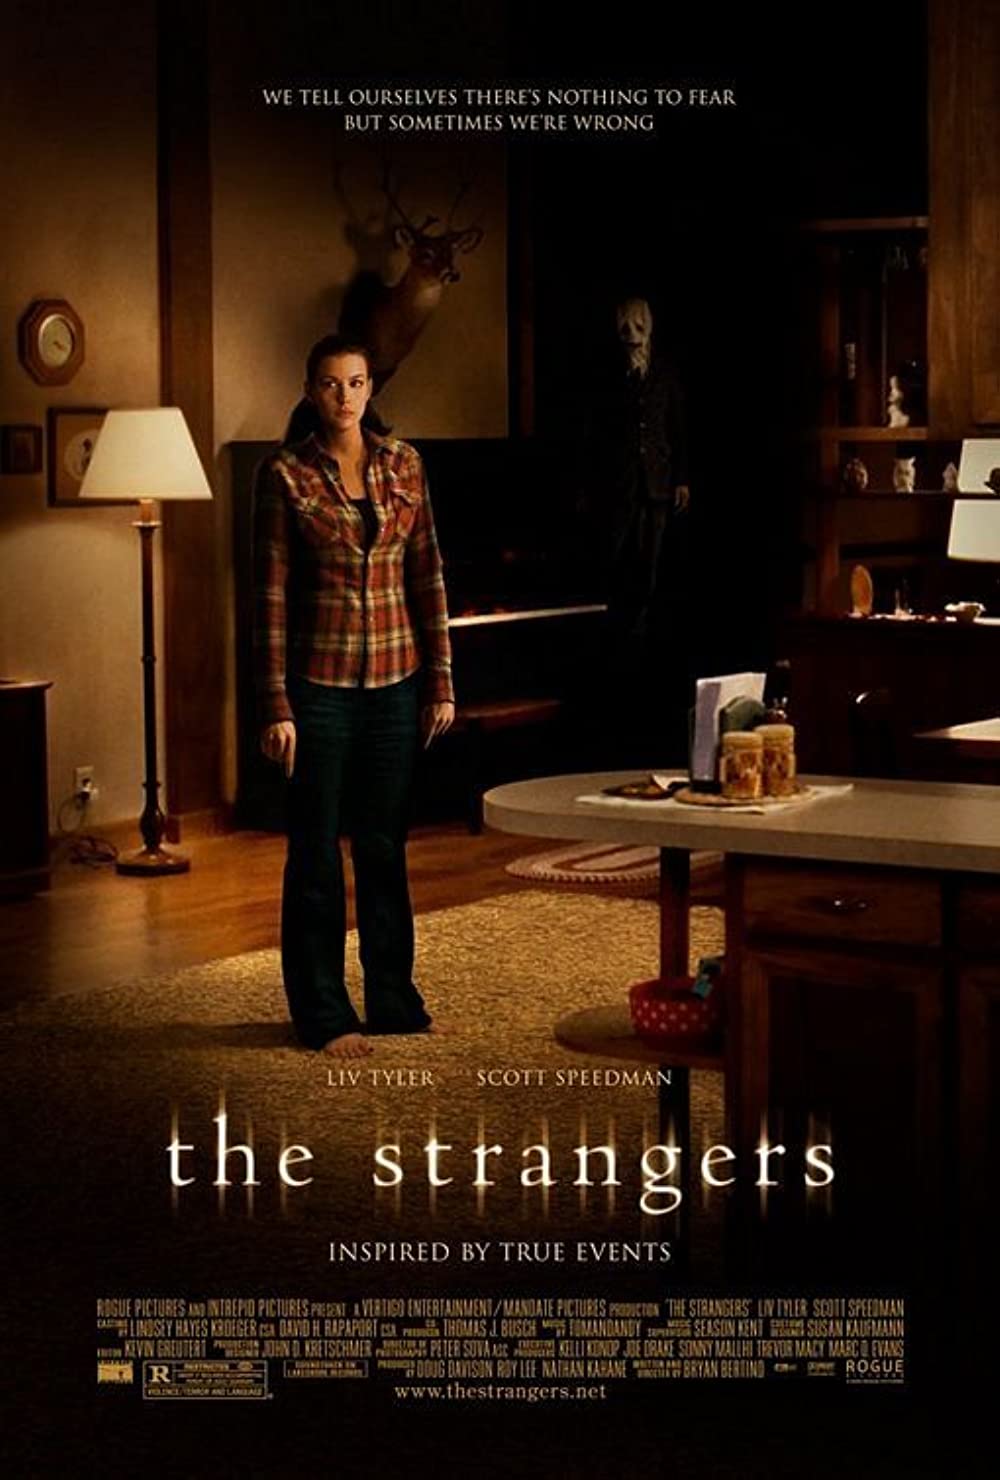 The Strangers (2008) Best Home Invasion Movies For Chilly Nights